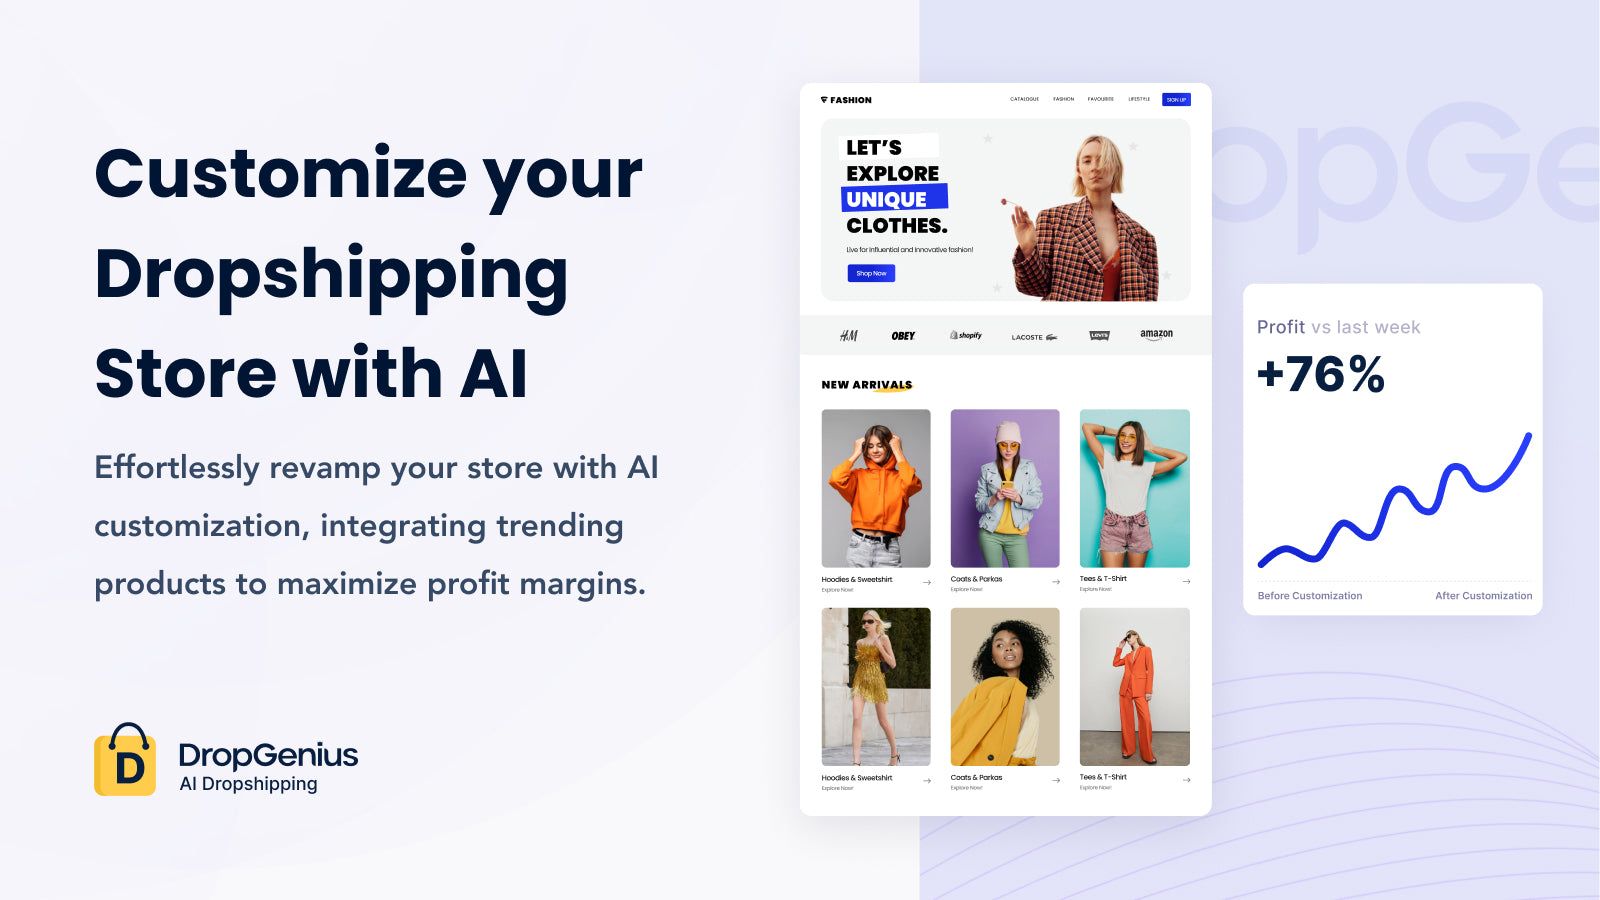 Customize your Dropshipping Store with AI